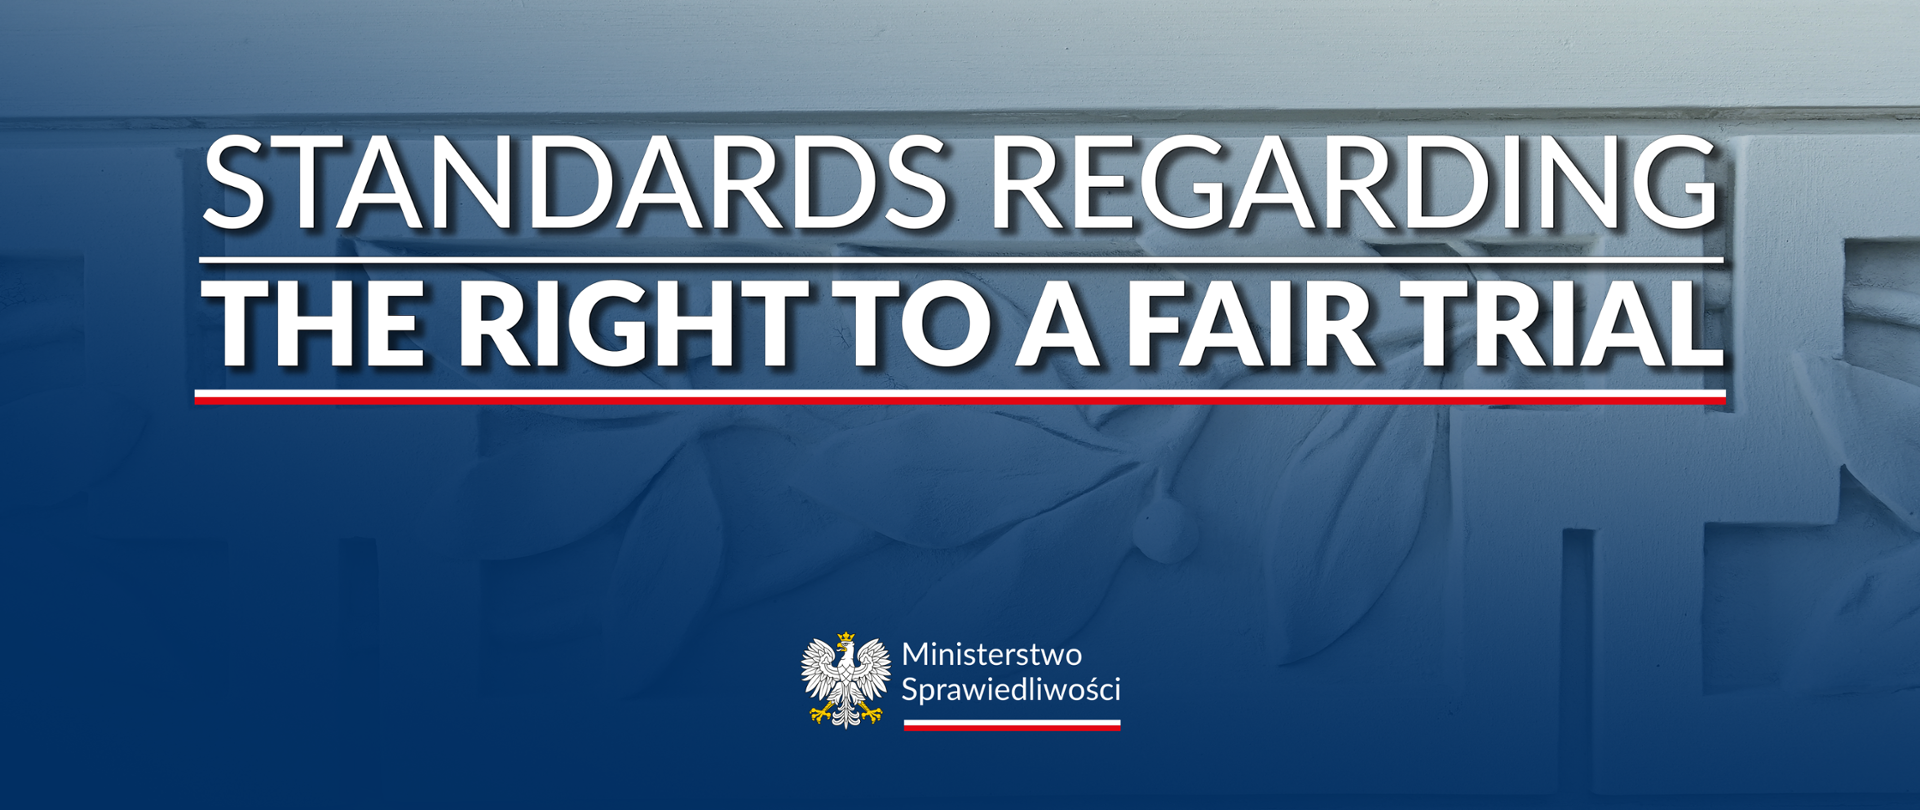 Communication of the Minister of Justice on the standards regarding the right to a fair trial
